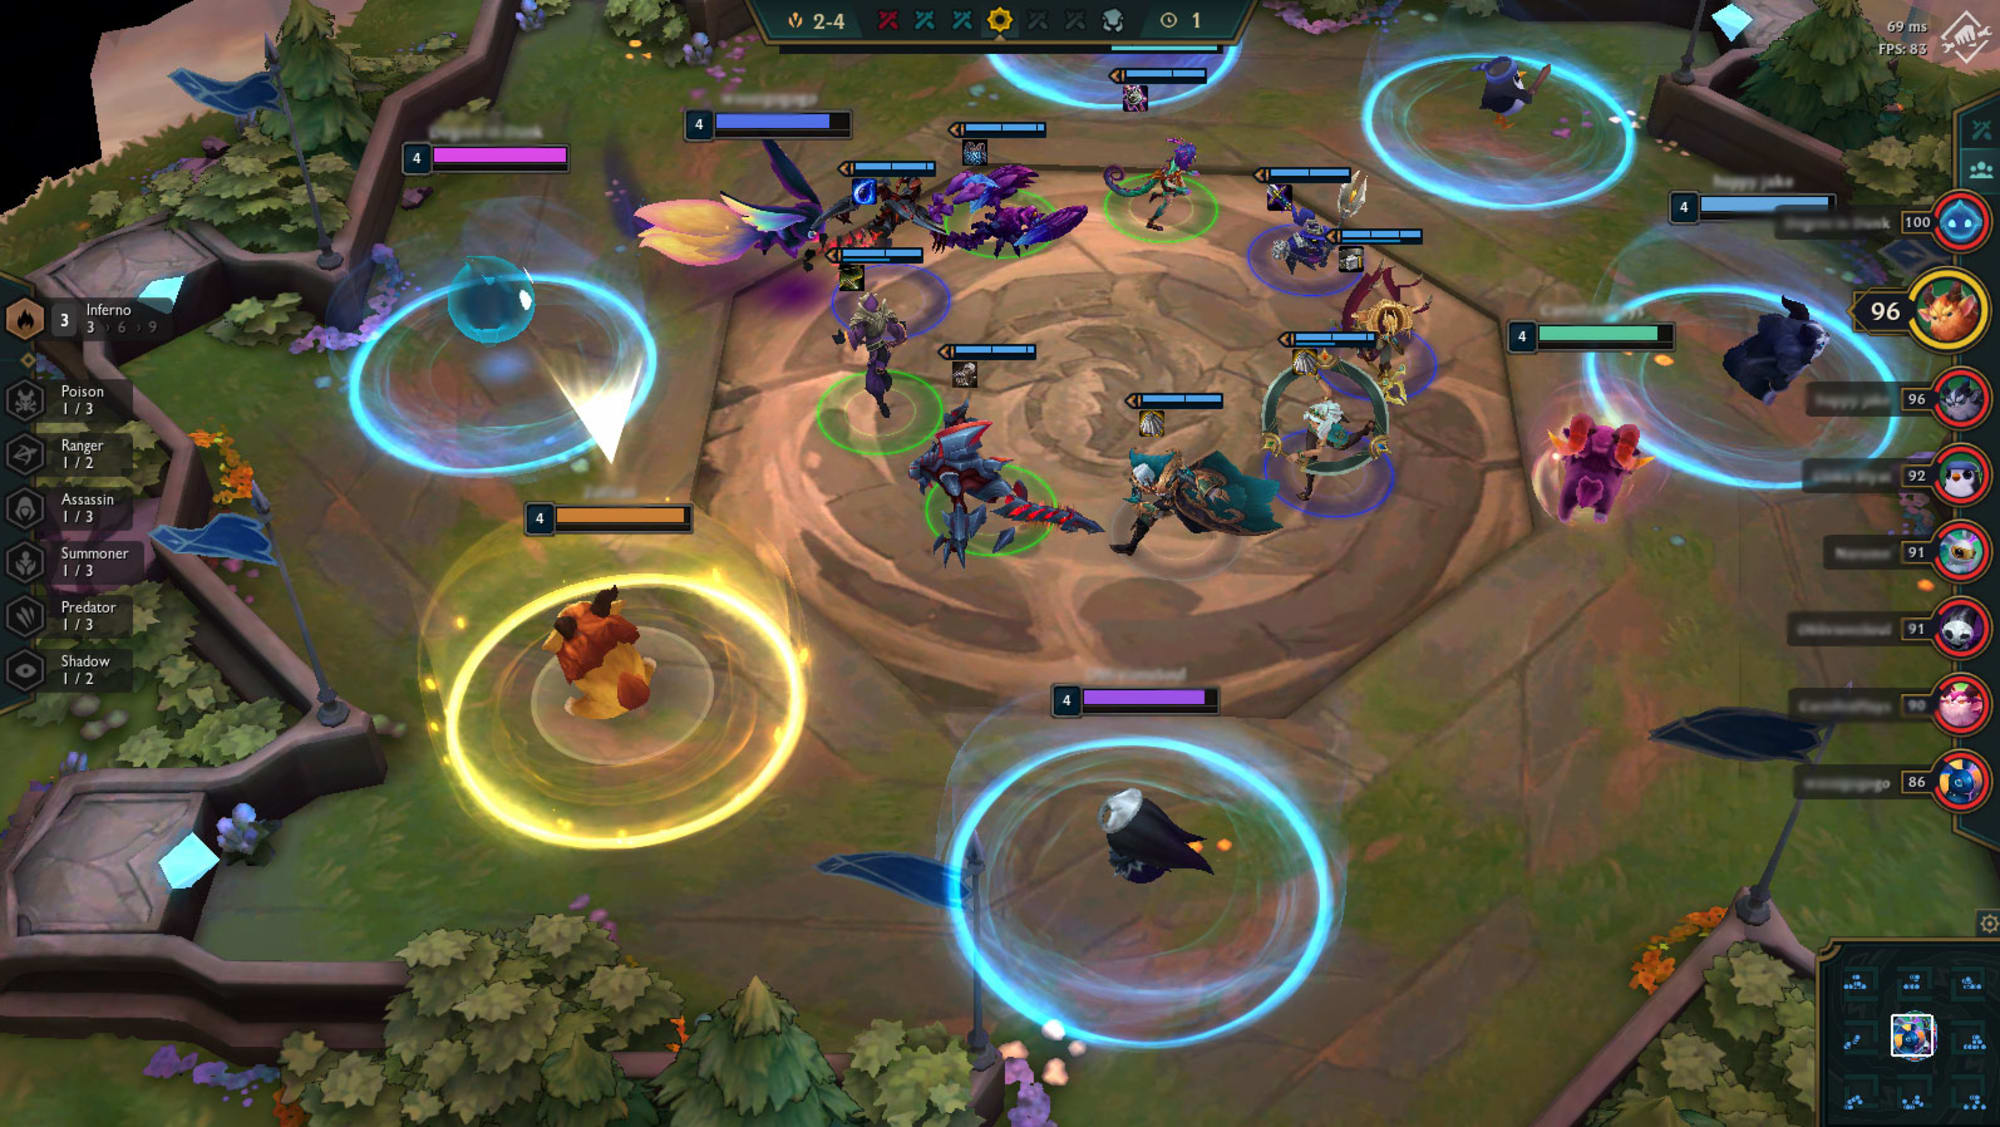 TFT: Here's when Teamfight Tactics is coming to mobile.